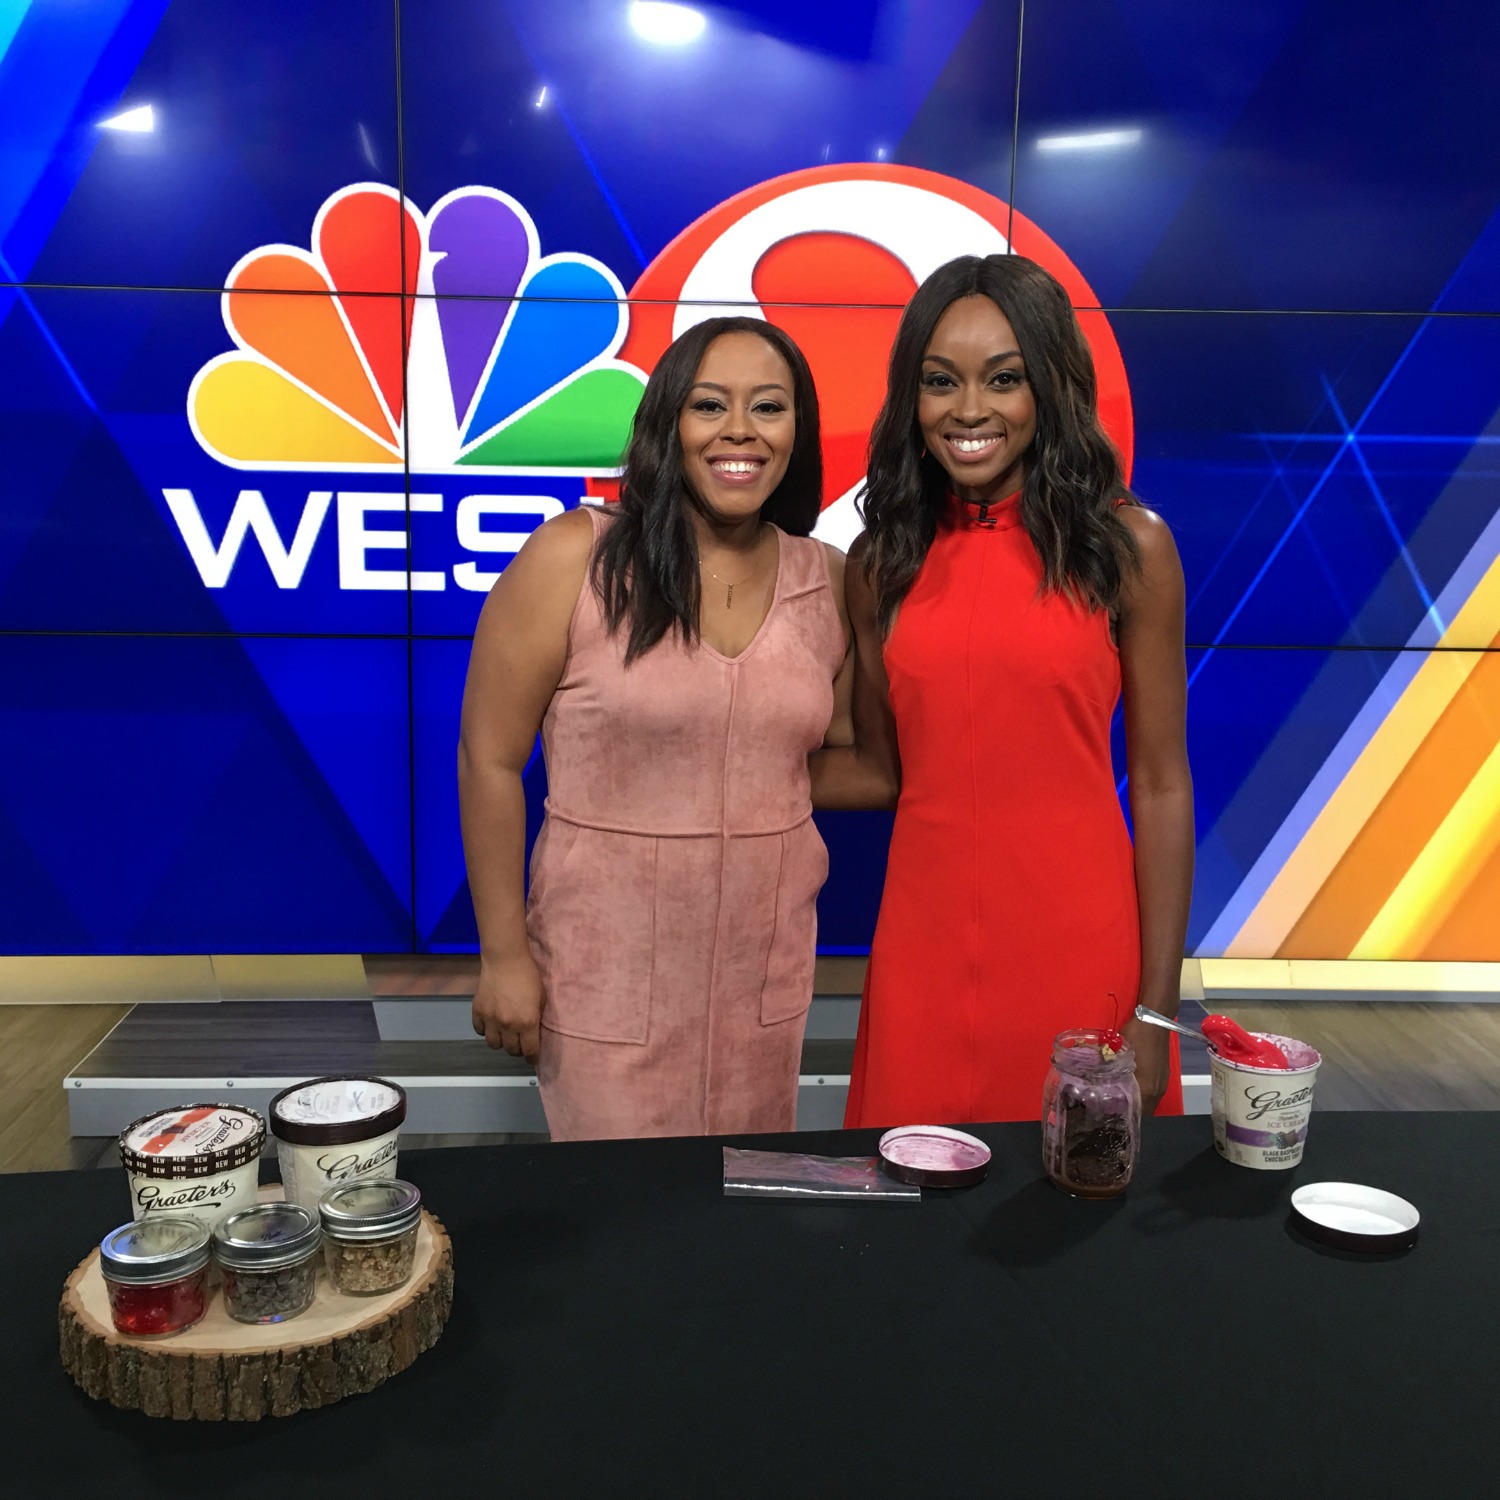 Orlando lifestyle blogger Bianca Dottin shares 11 tips for preparing for your first tv segment after her experience doing a Father's Day tv segment on Wesh.